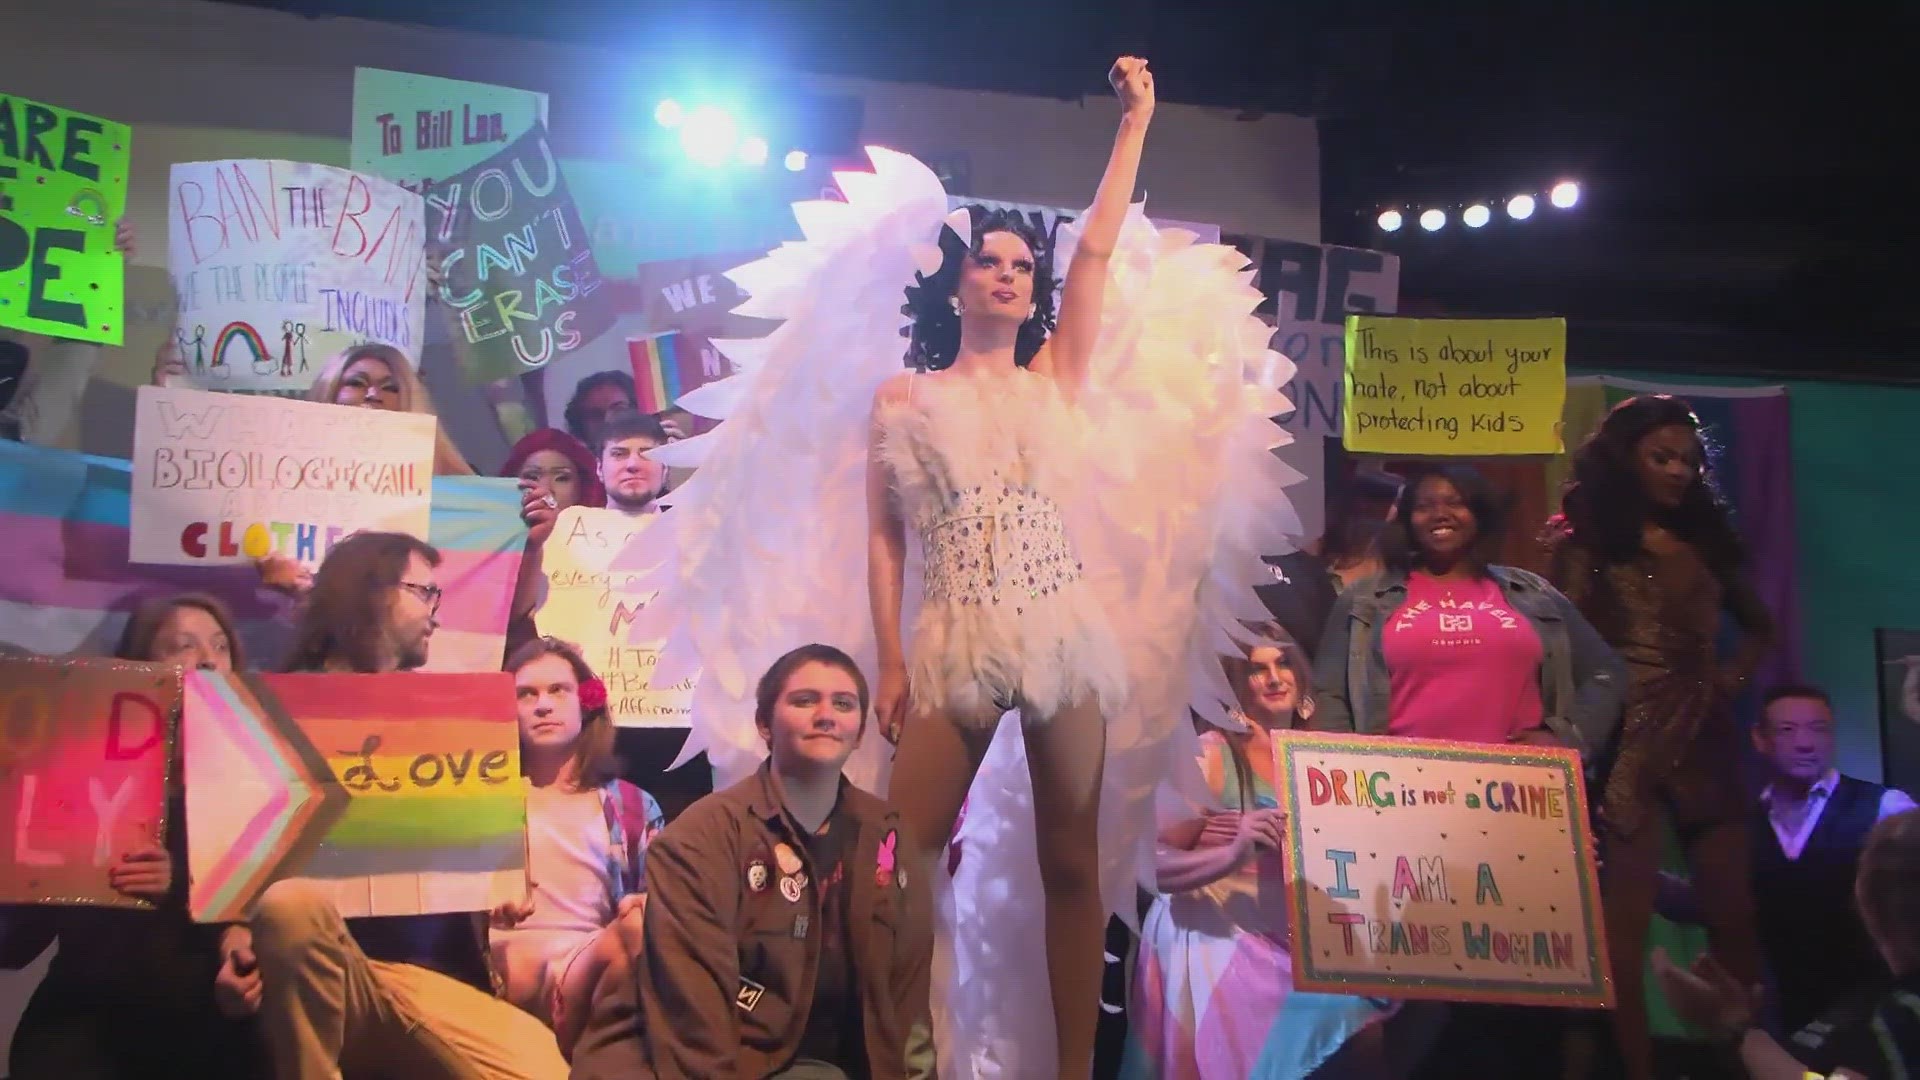 A federal judge struck down Tennessee's anti-drag law and has now ruled it as "unconstitutional."